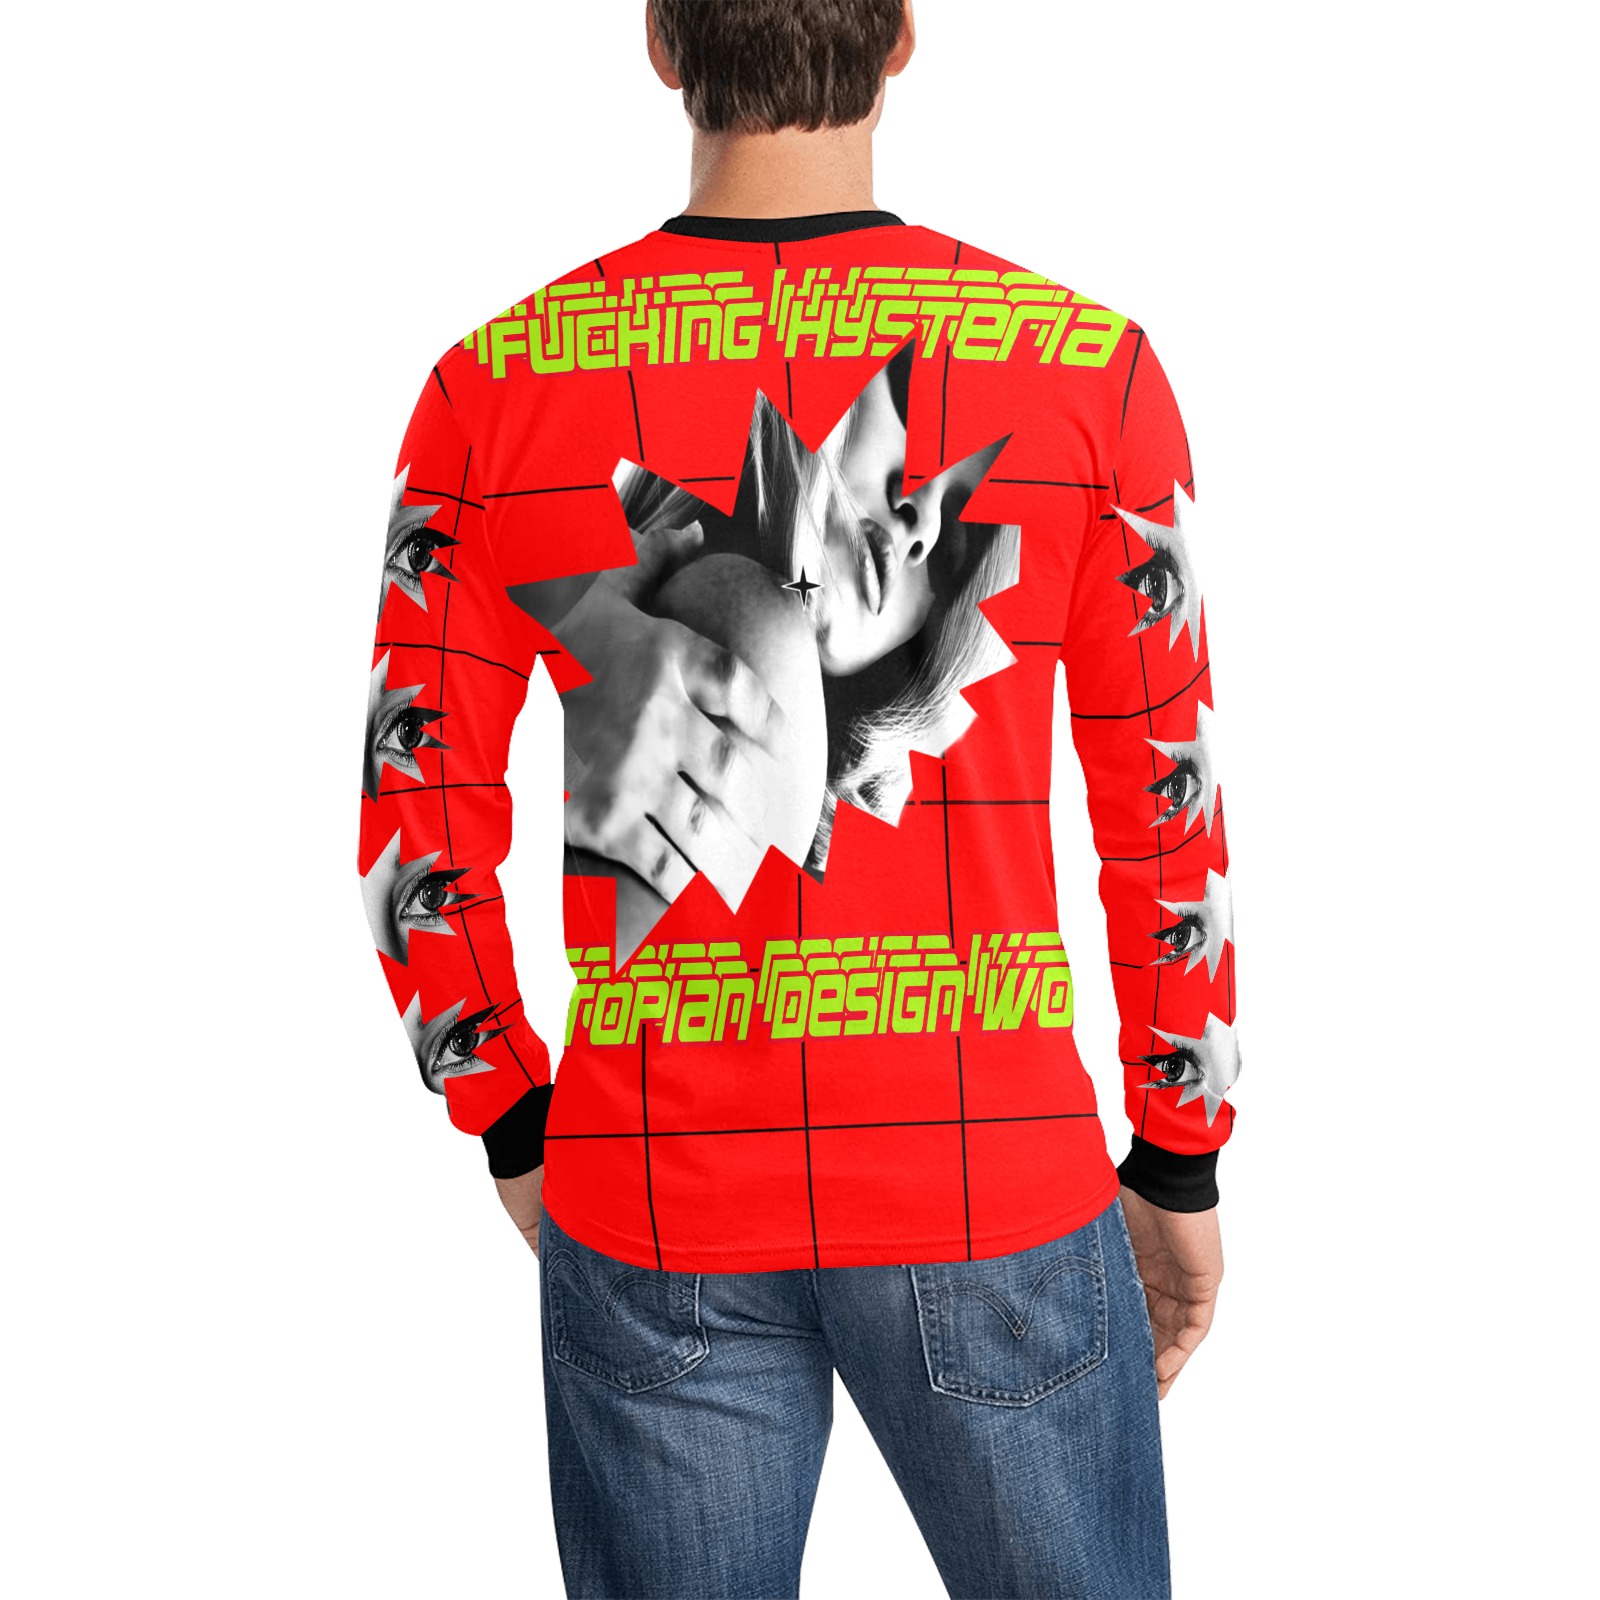 FH MOTO 23 FURIAN RED Men's All Over Print Long Sleeve T-shirt (Model T51)